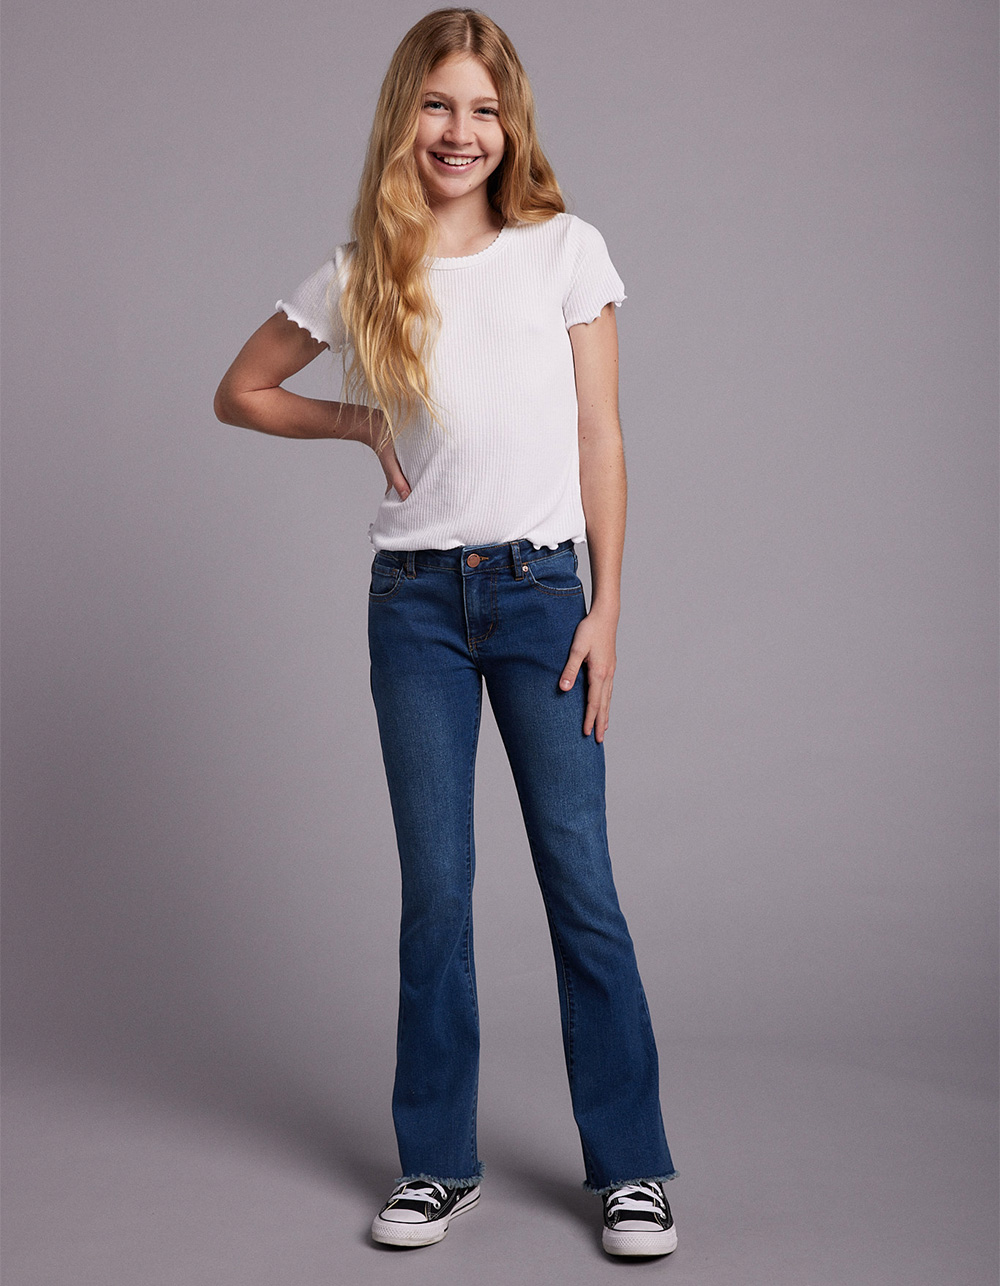 RSQ Girls Low Rise Flare Jeans - Dark Wash